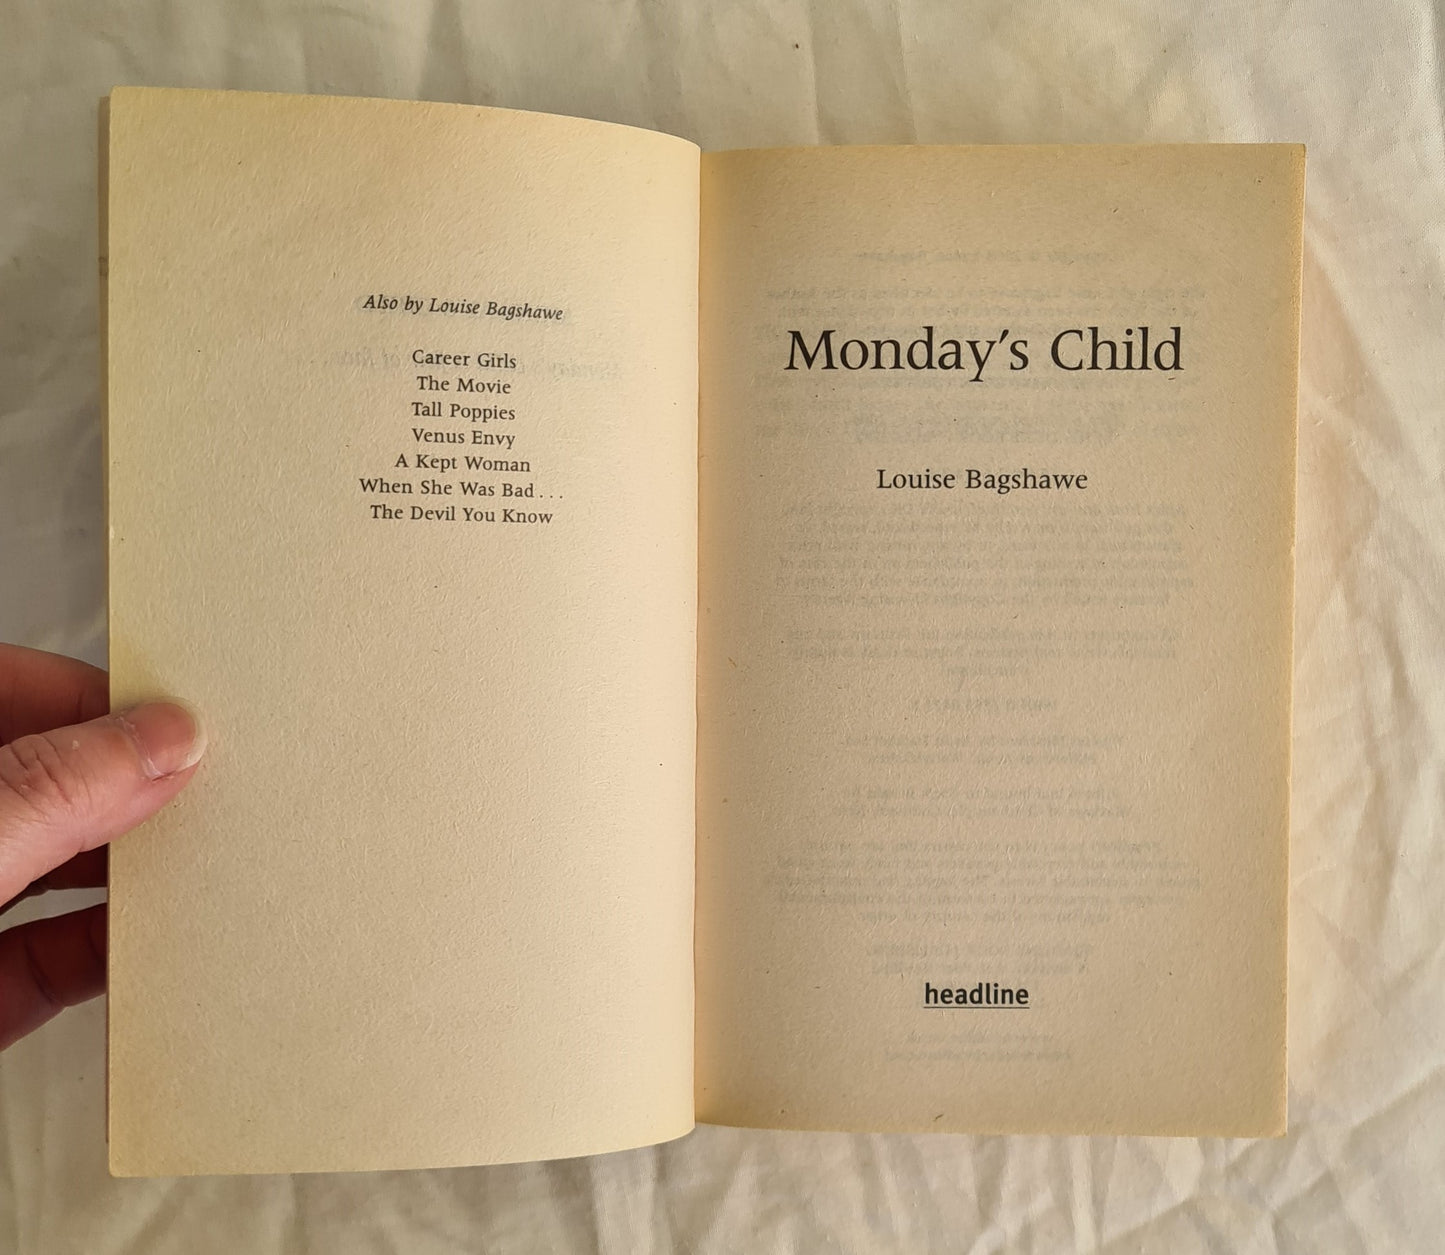 Monday’s Child by Louise Bagshawe